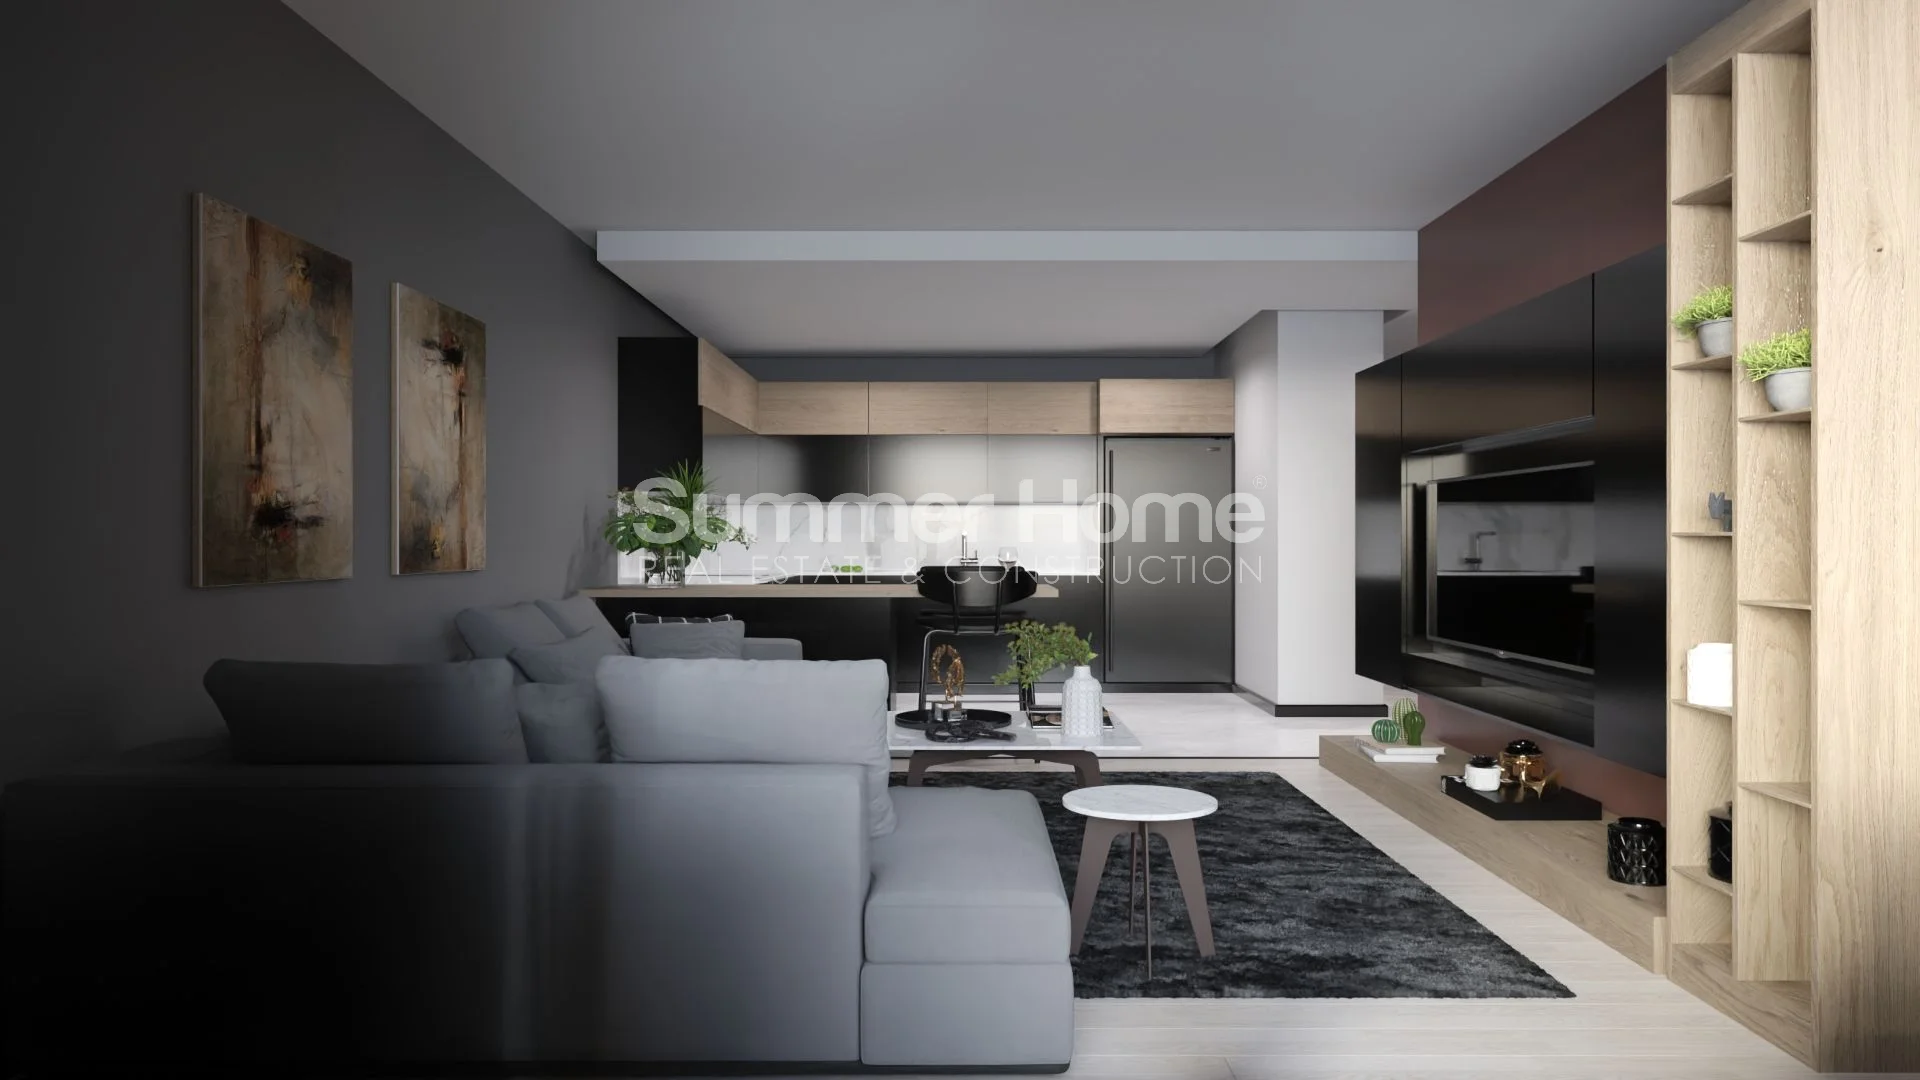 Newly completed sleek apartments located in Mezitli, Mersin Interior - 10